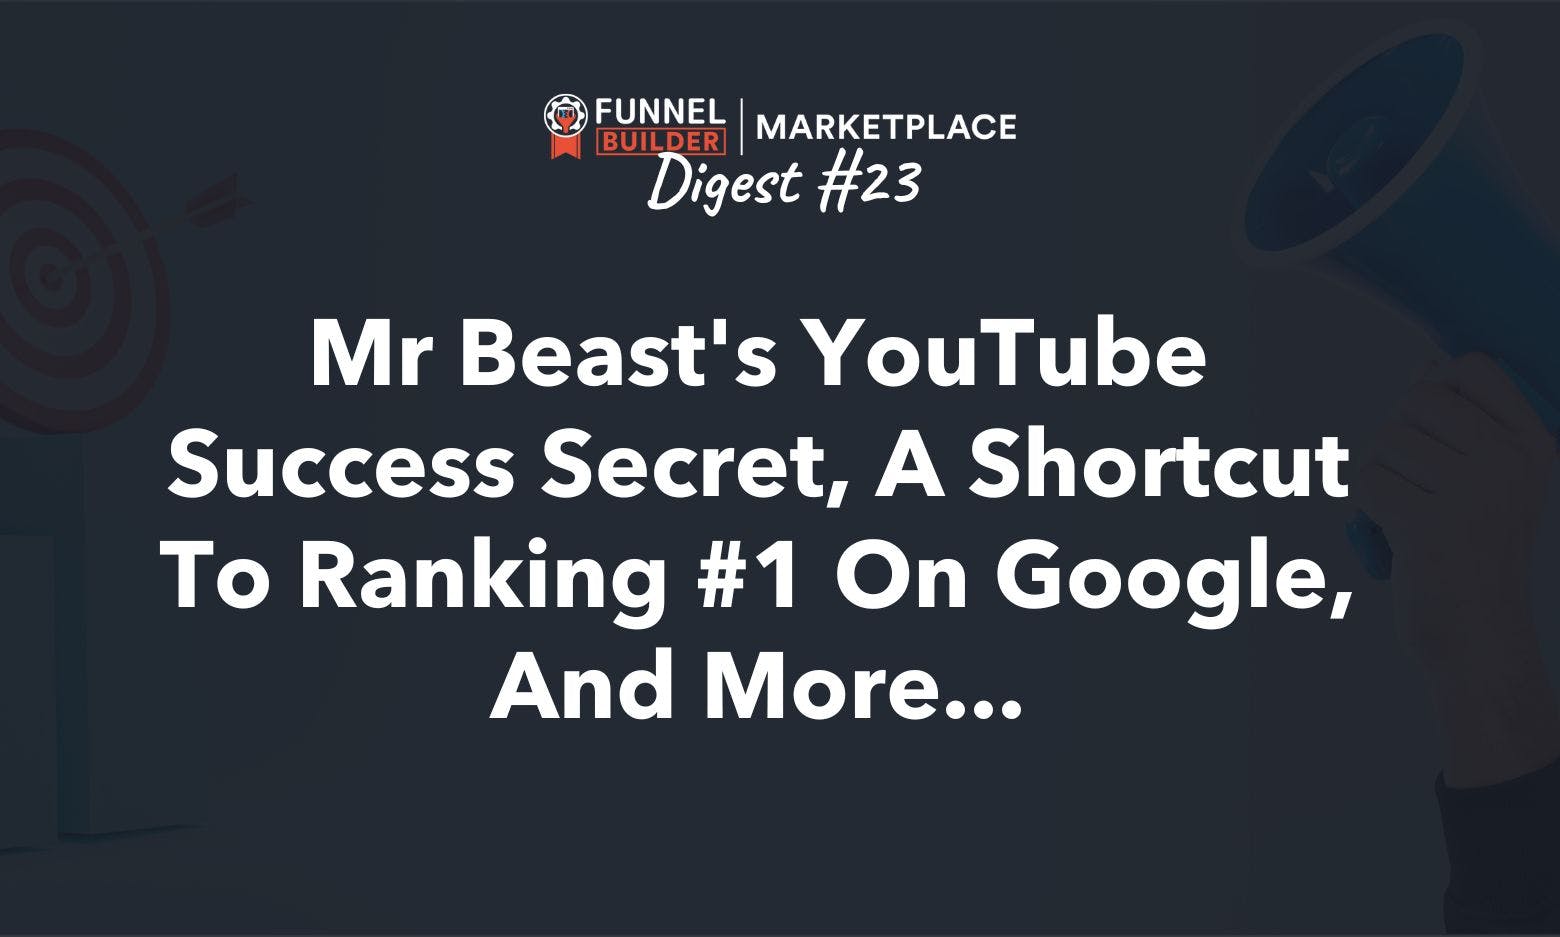 FBM Digest #23: Mr Beast's YouTube success secret, a shortcut to ranking #1 on Google, and more...